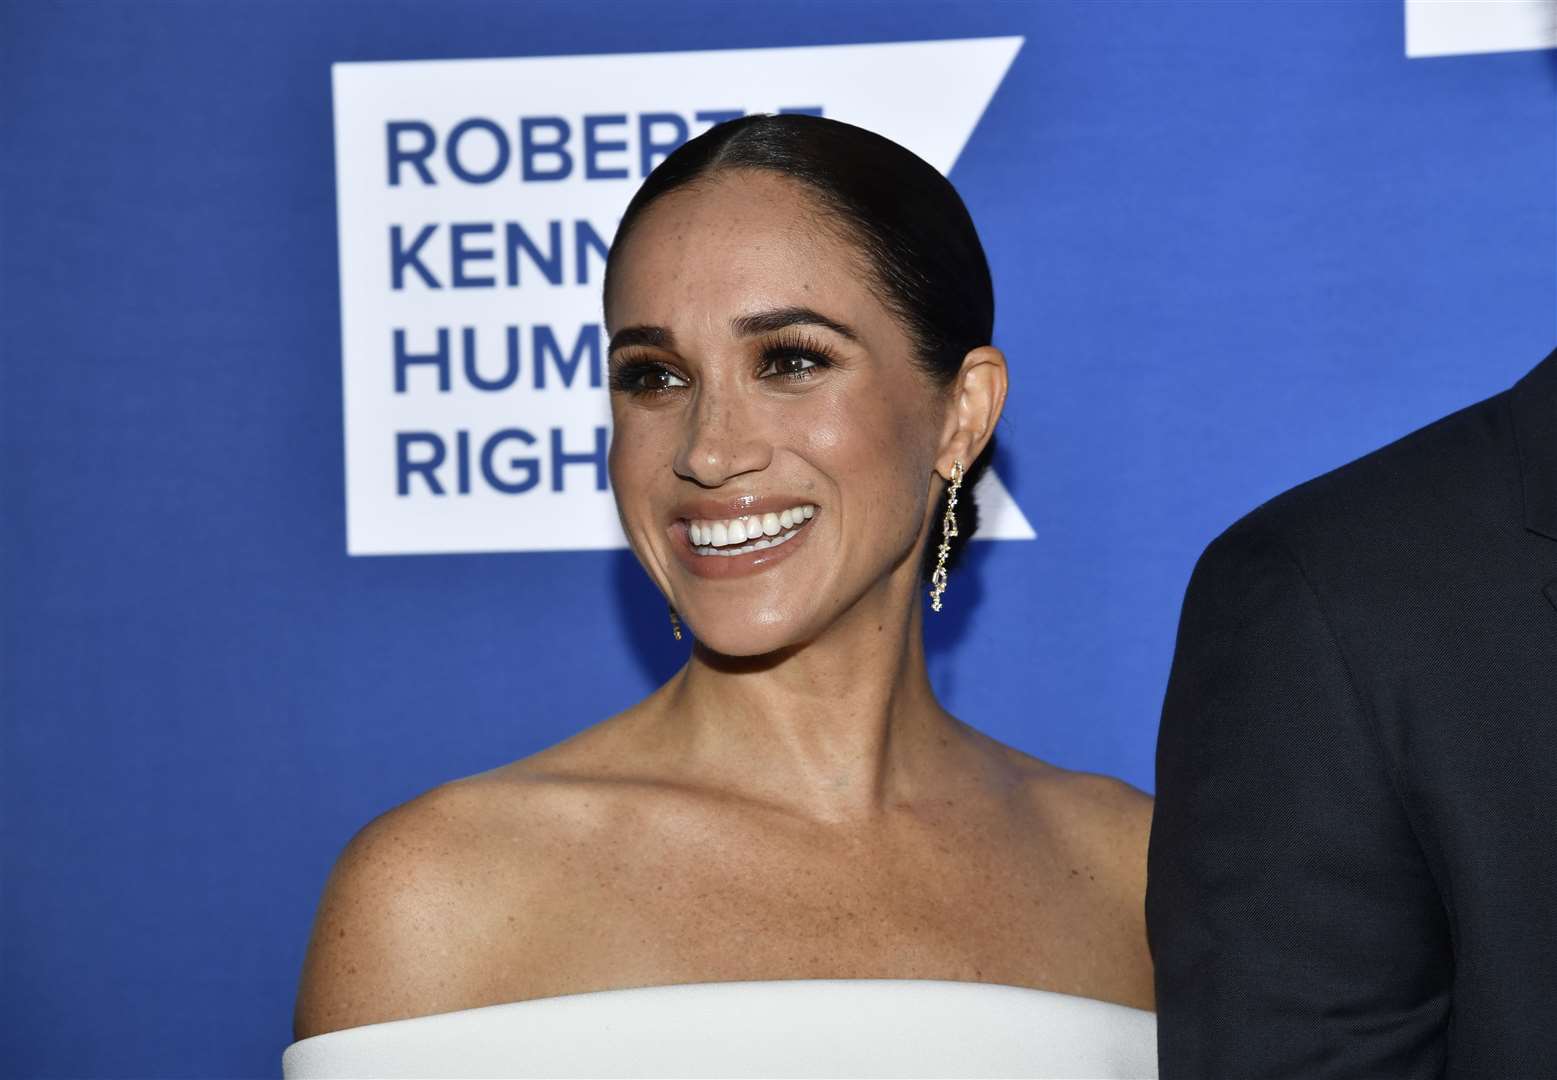 Kerry Kennedy, president of the RFKHR, said Meghan had ‘normalised’ discussion about mental health (Evan Agostini/Invision/AP)